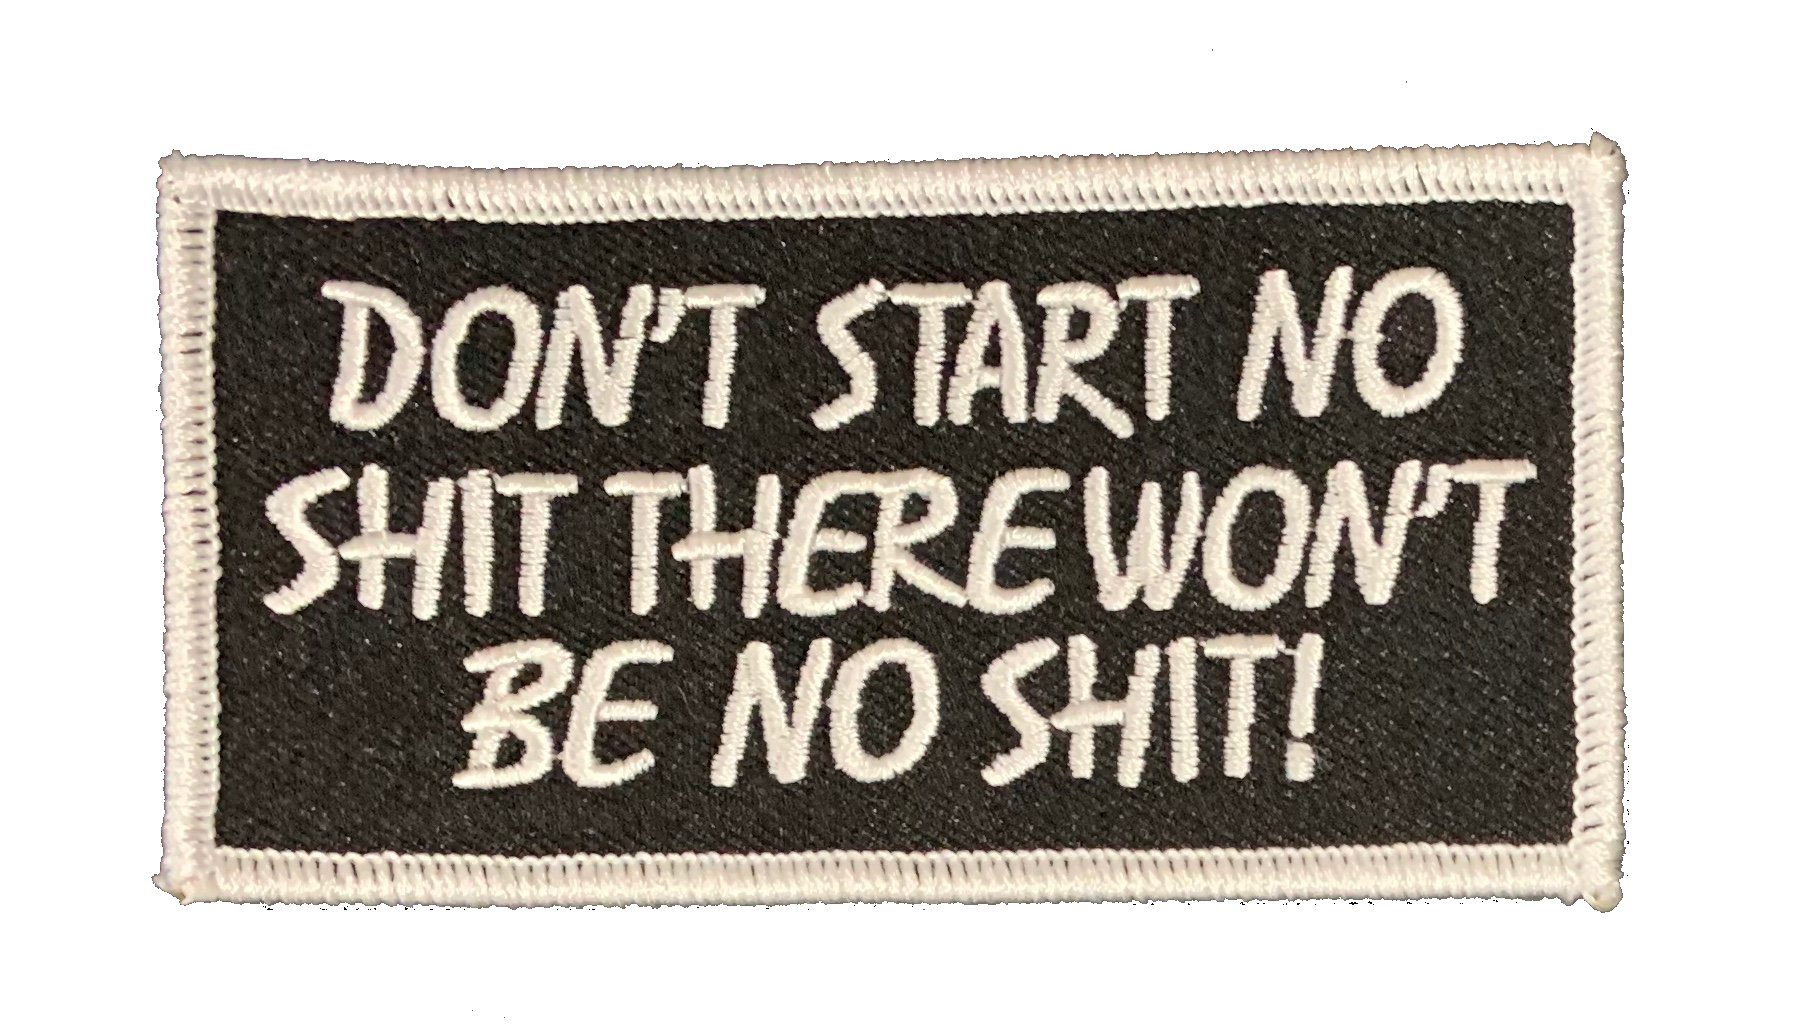 DON'T START NO SHIT THERE WON'T BE NO SHIT | ABC PATCHES